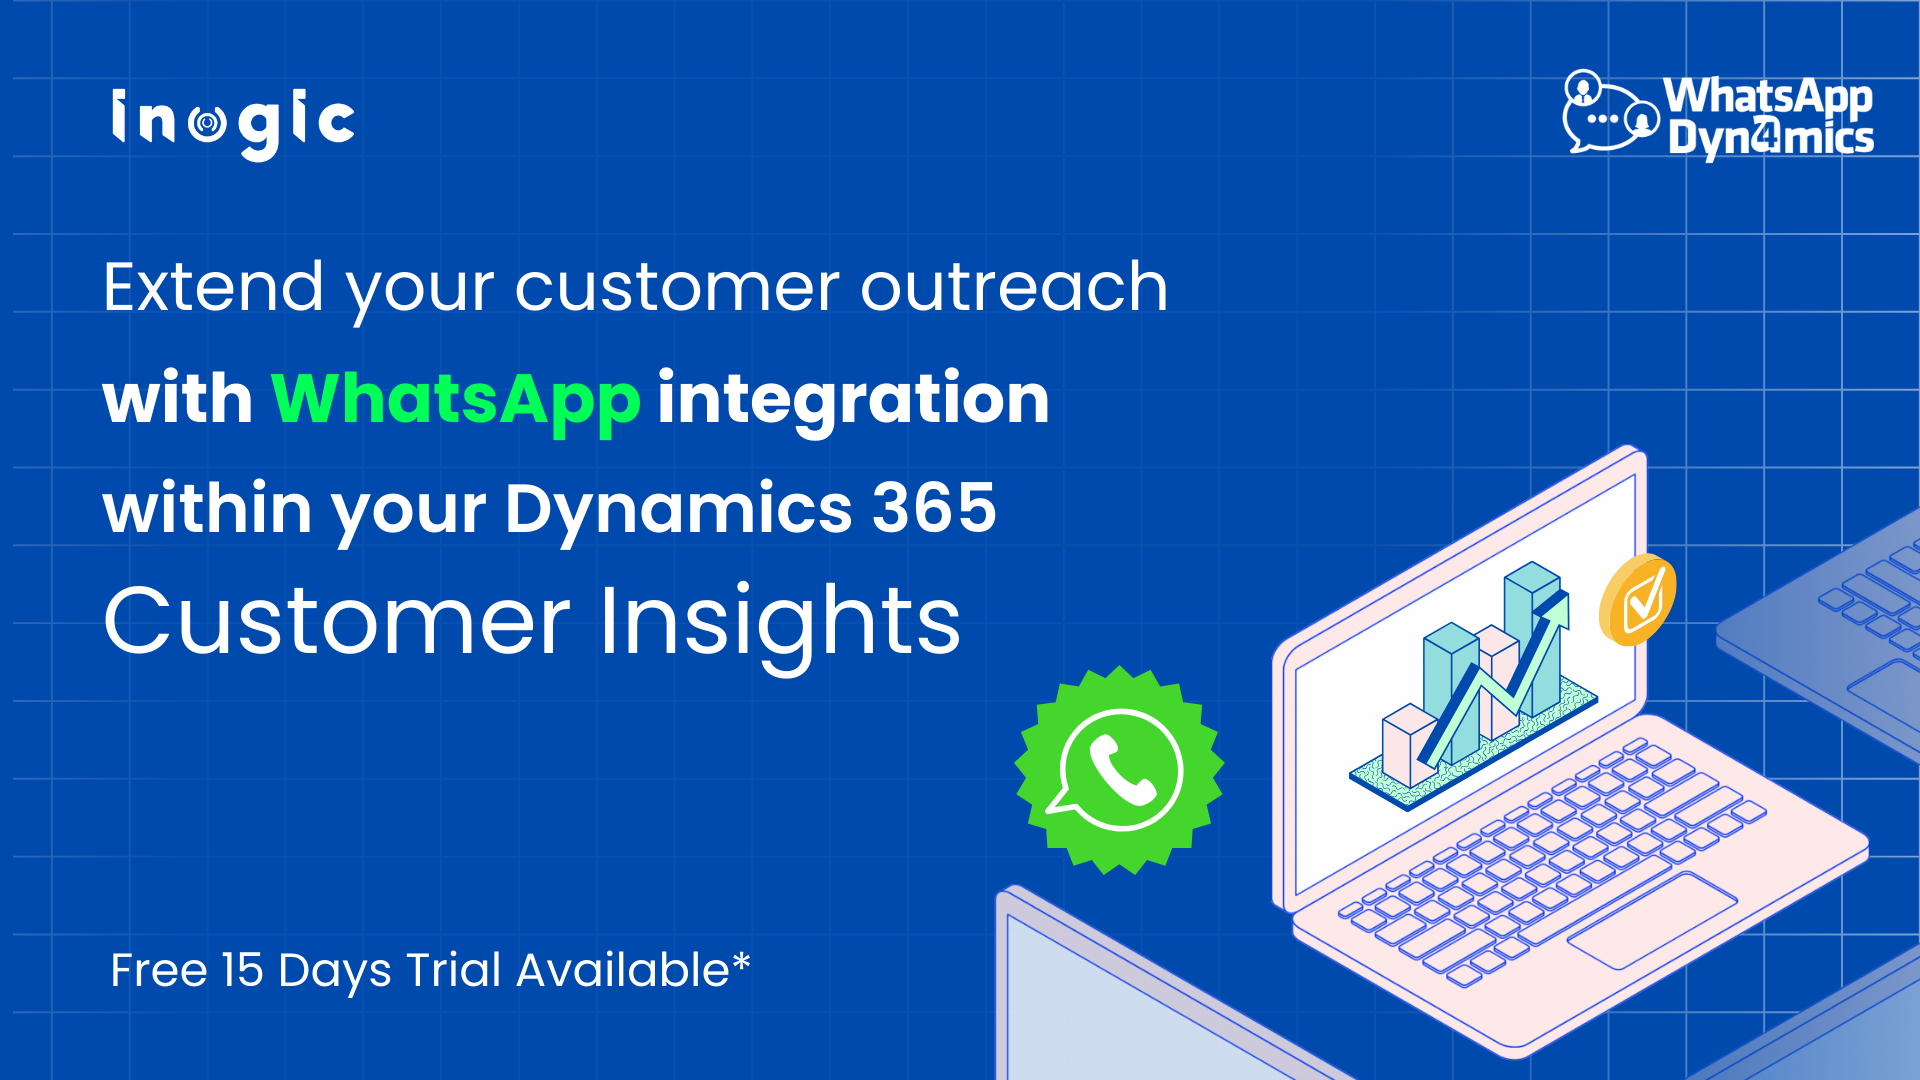 Extend your customer outreach with WhatsApp marketing within Dynamics 365 Customer Insights